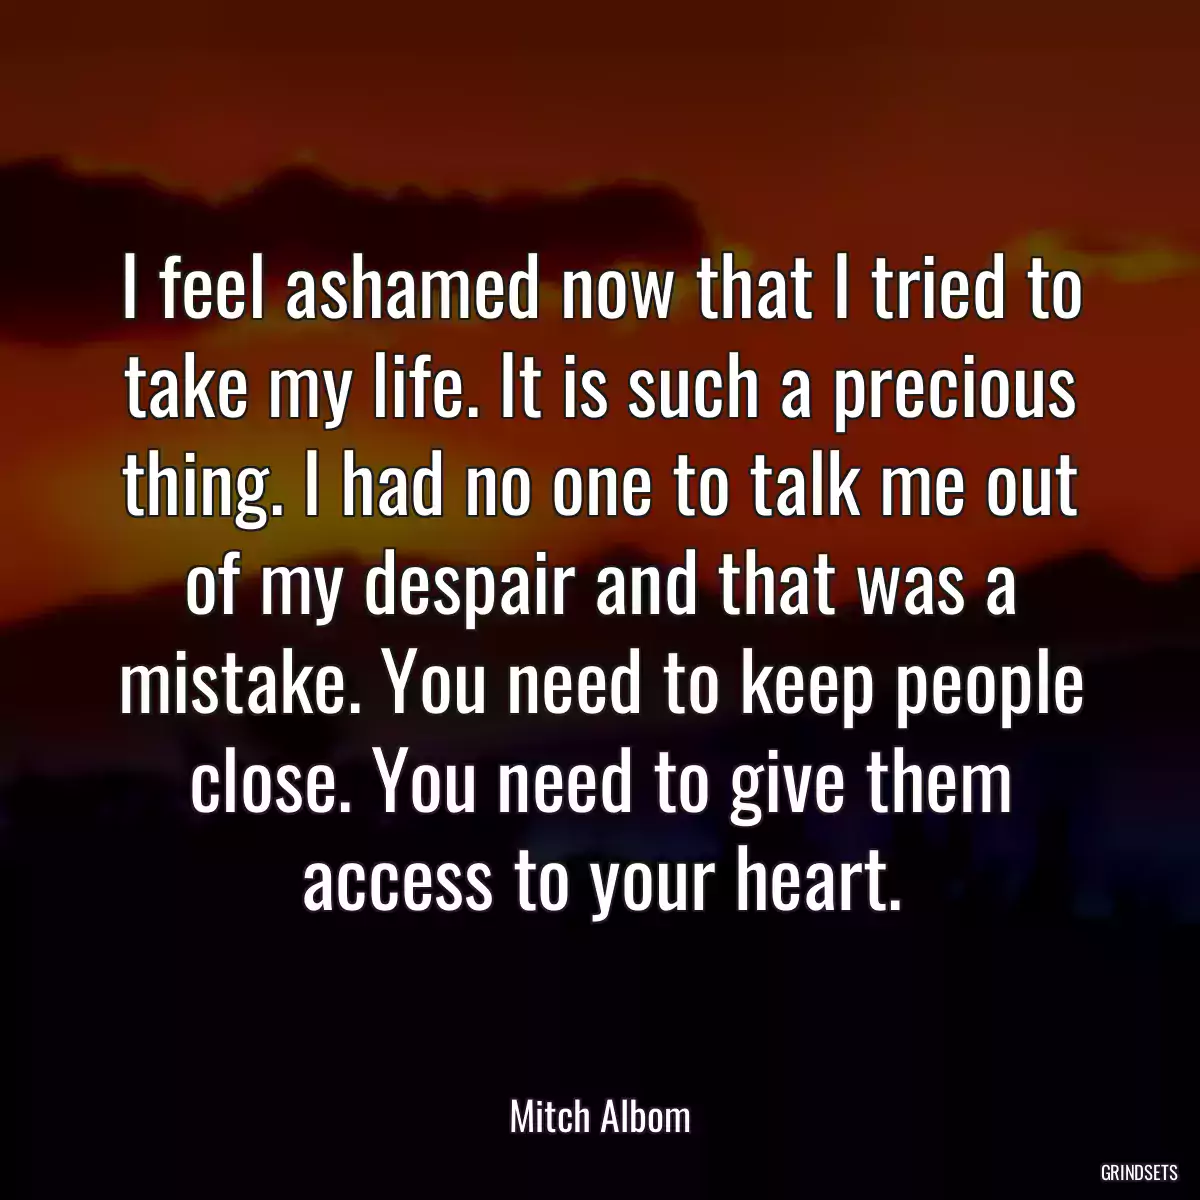 I feel ashamed now that I tried to take my life. It is such a precious thing. I had no one to talk me out of my despair and that was a mistake. You need to keep people close. You need to give them access to your heart.